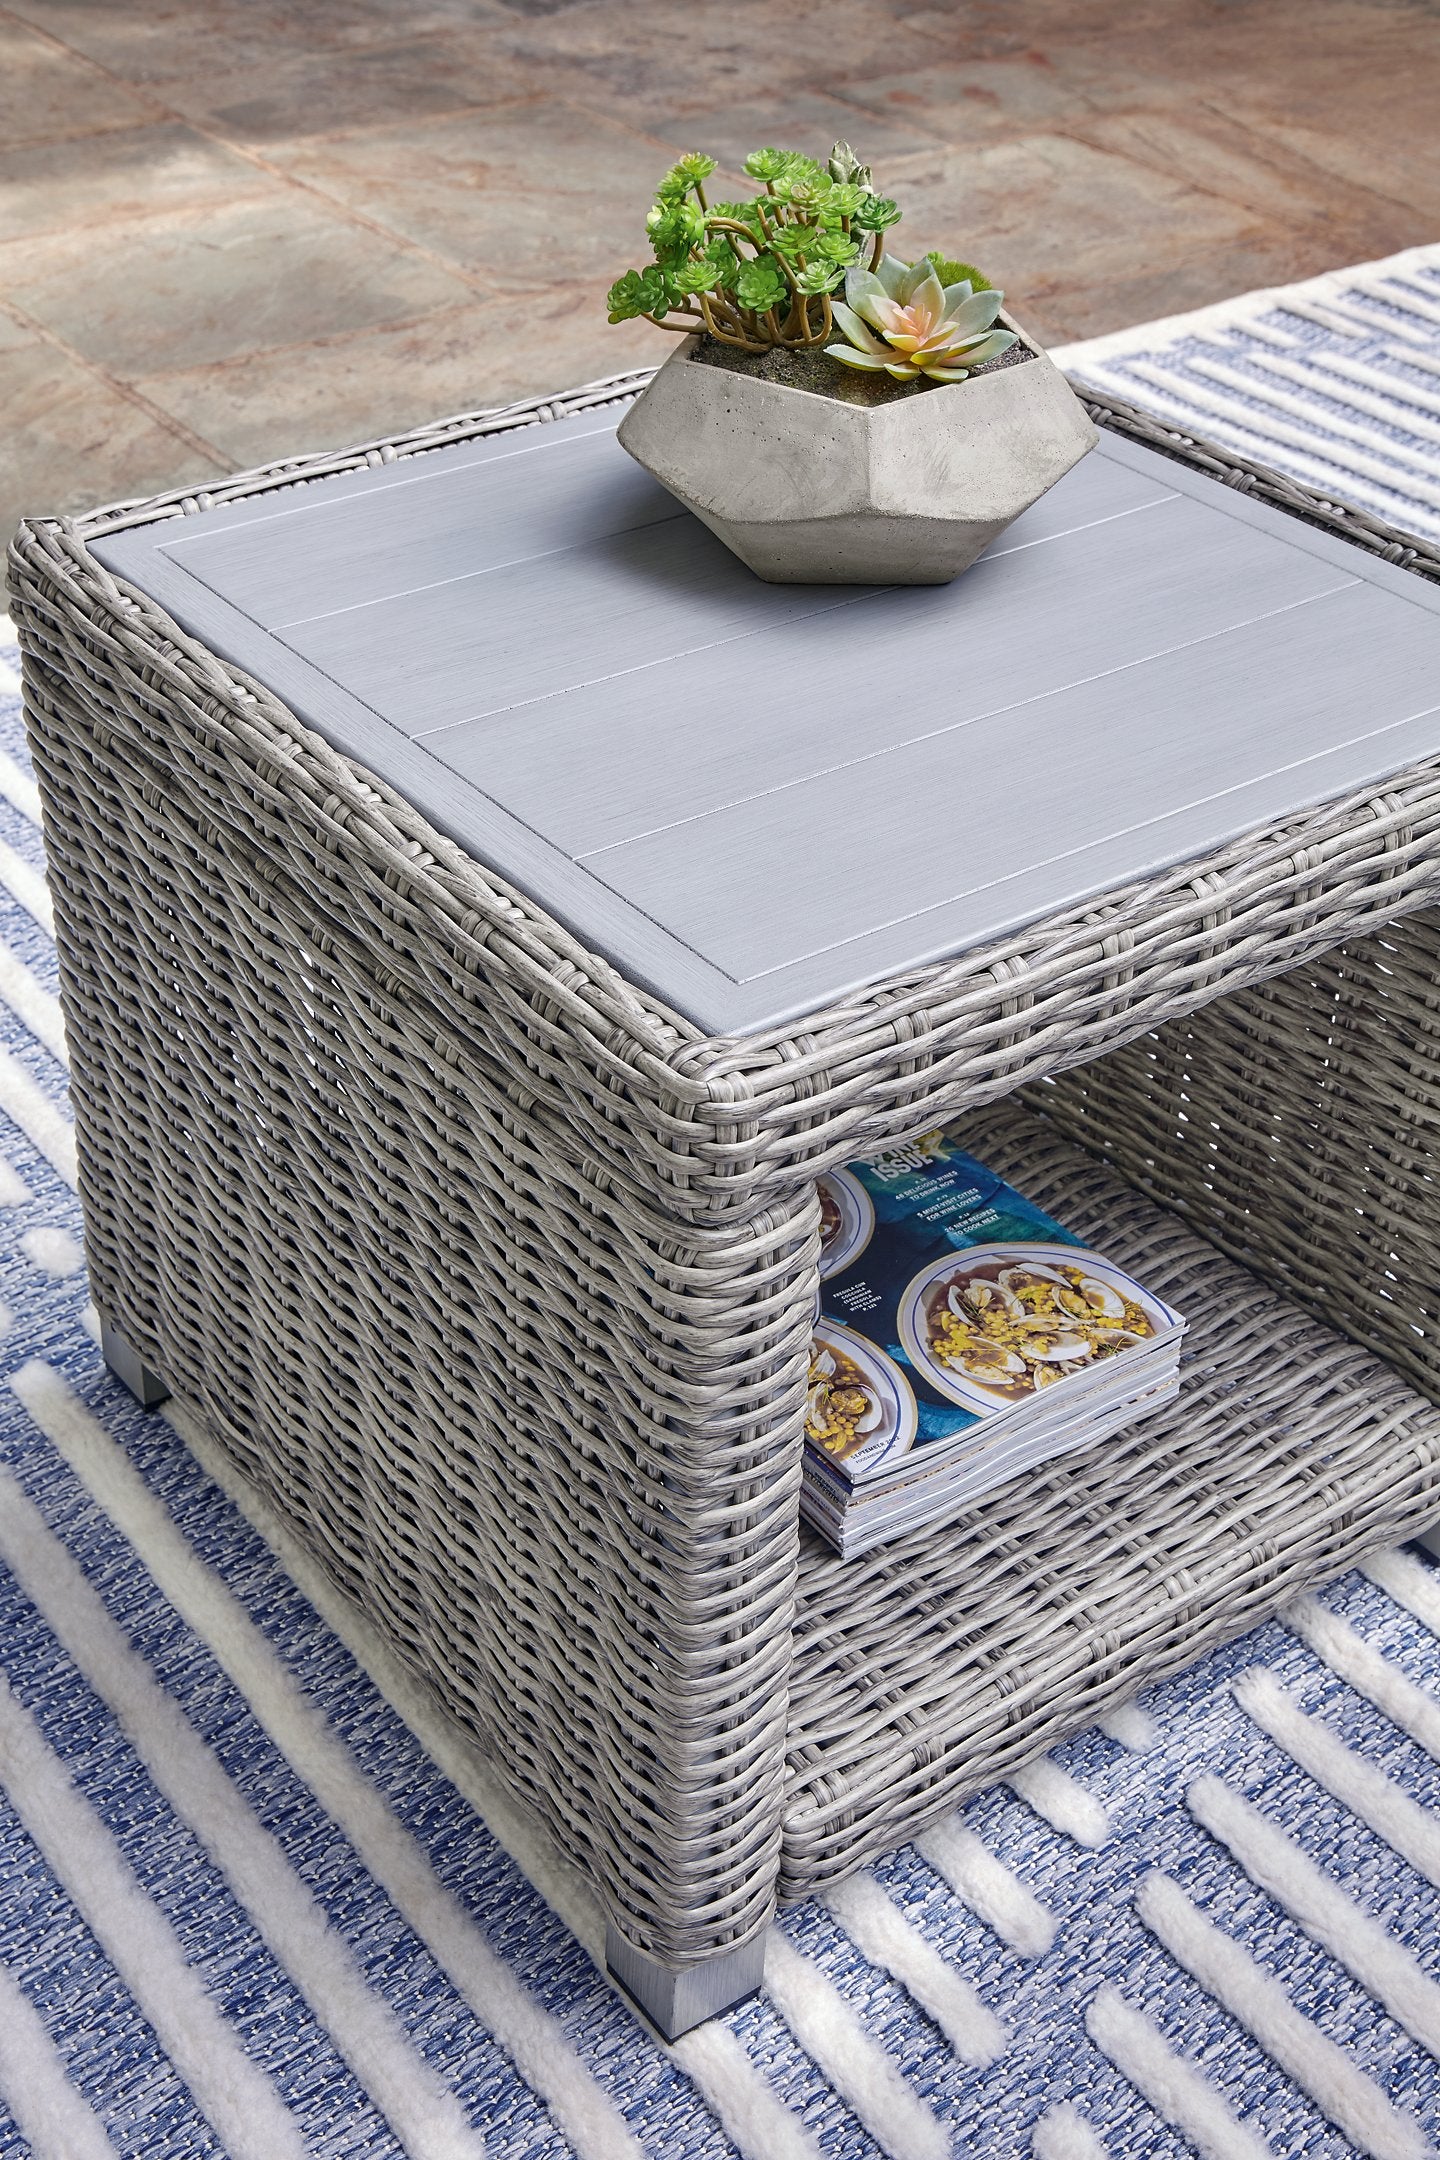 Naples Beach Outdoor End Table - Half Price Furniture